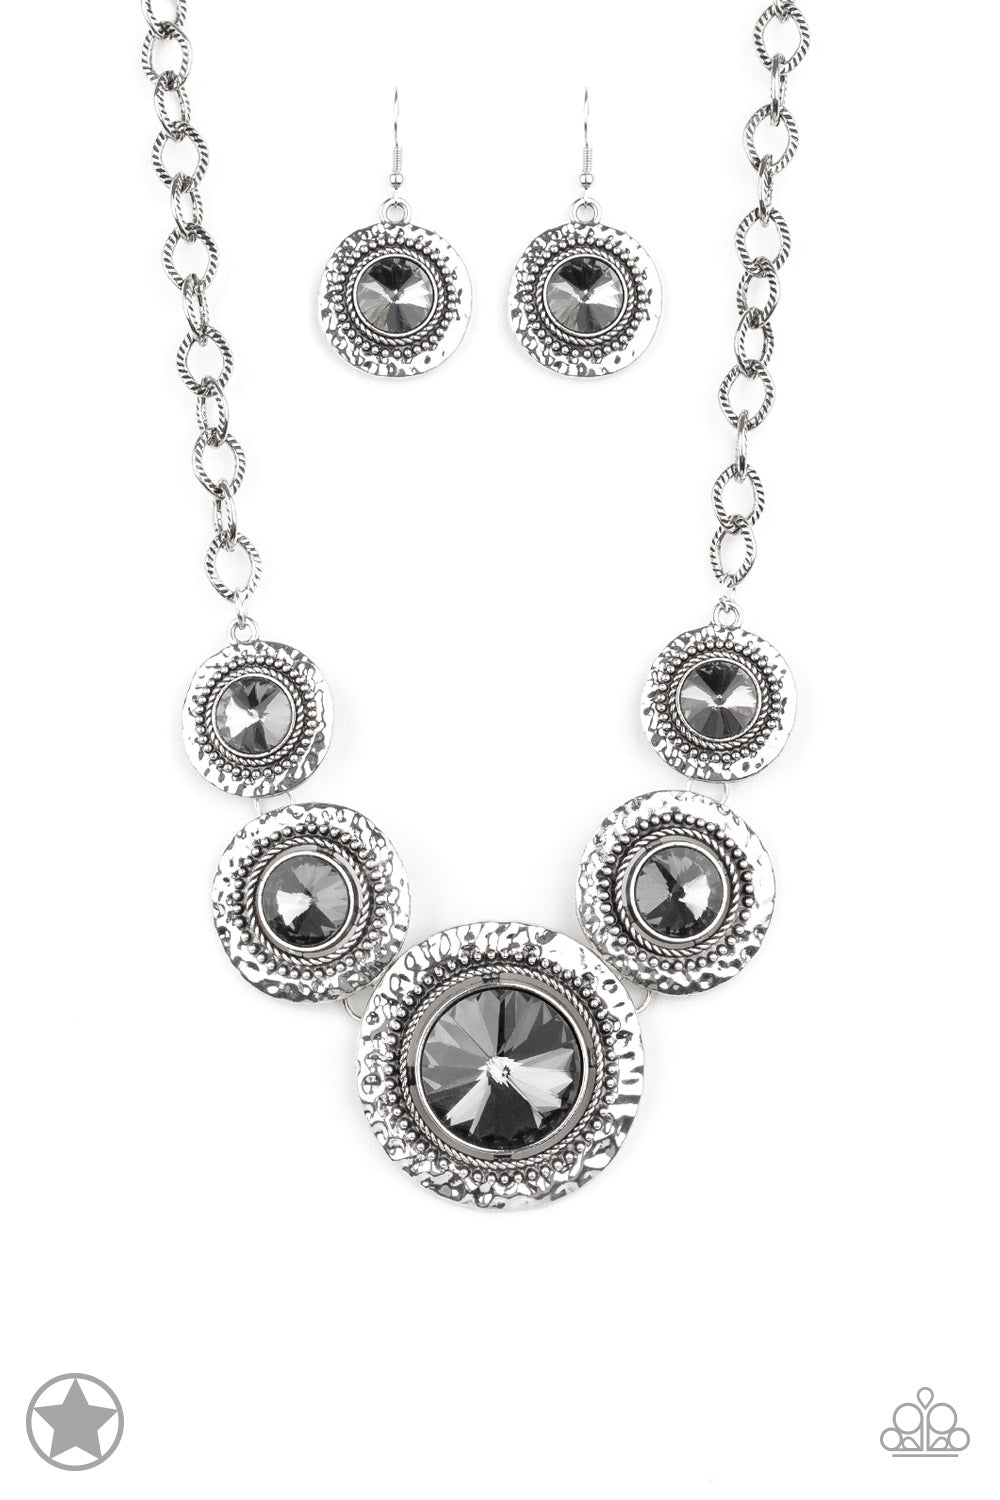 Global Glamour-Silver Blockbuster Necklace